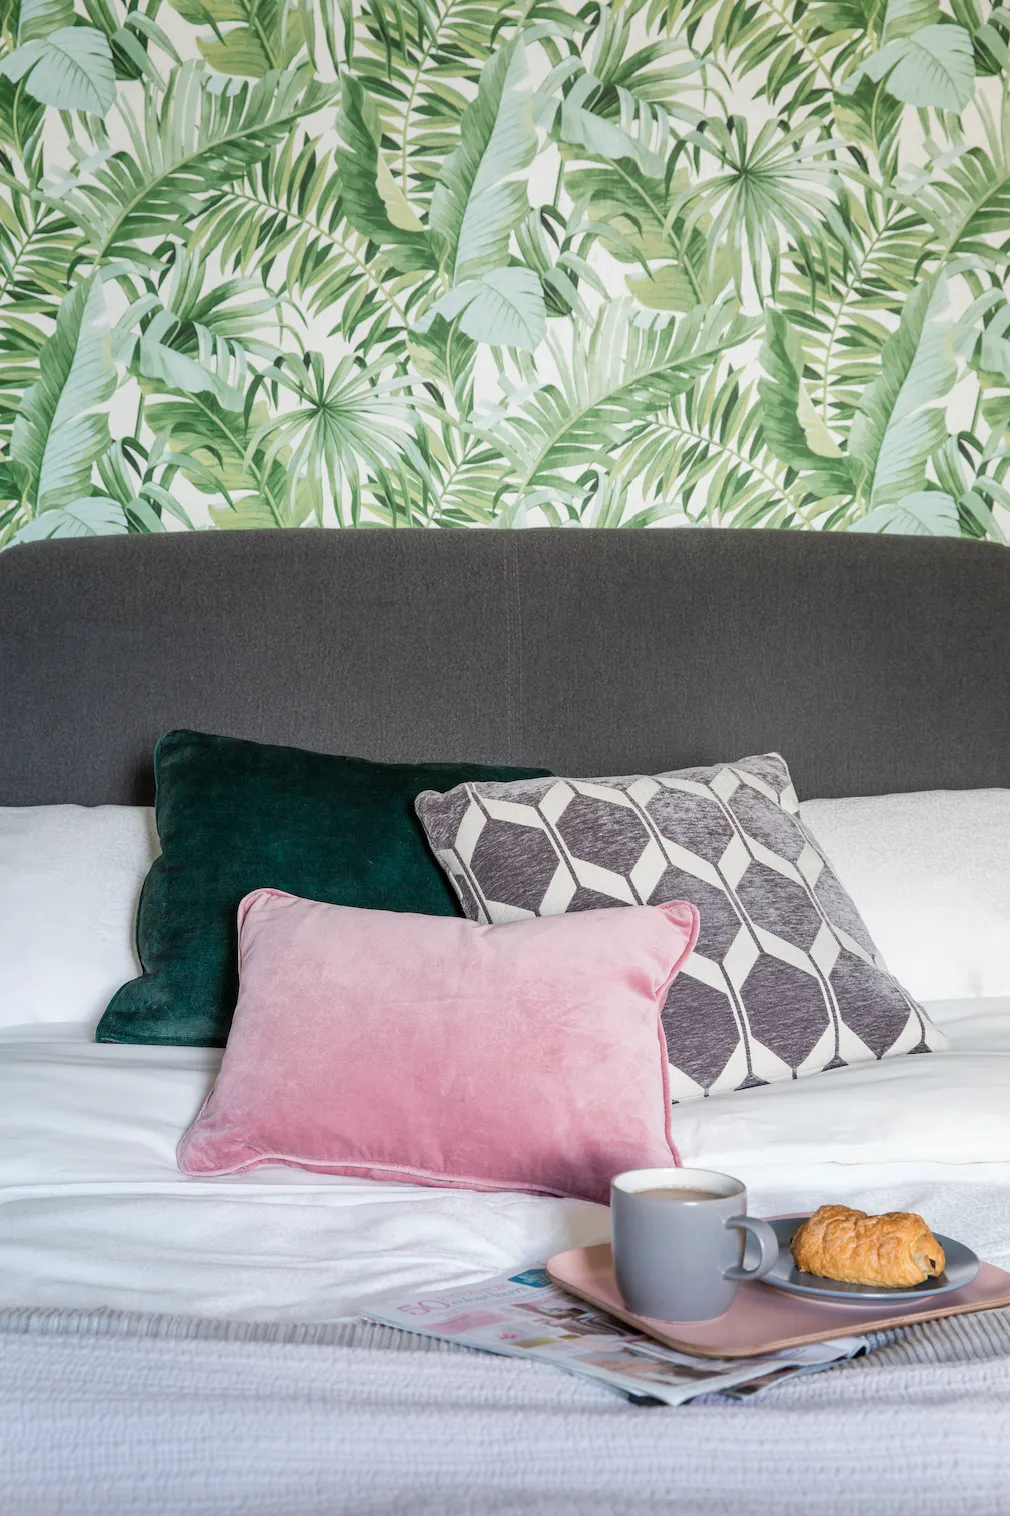 Bedroom makeover: 'It turned out exactly as I imagined it!'